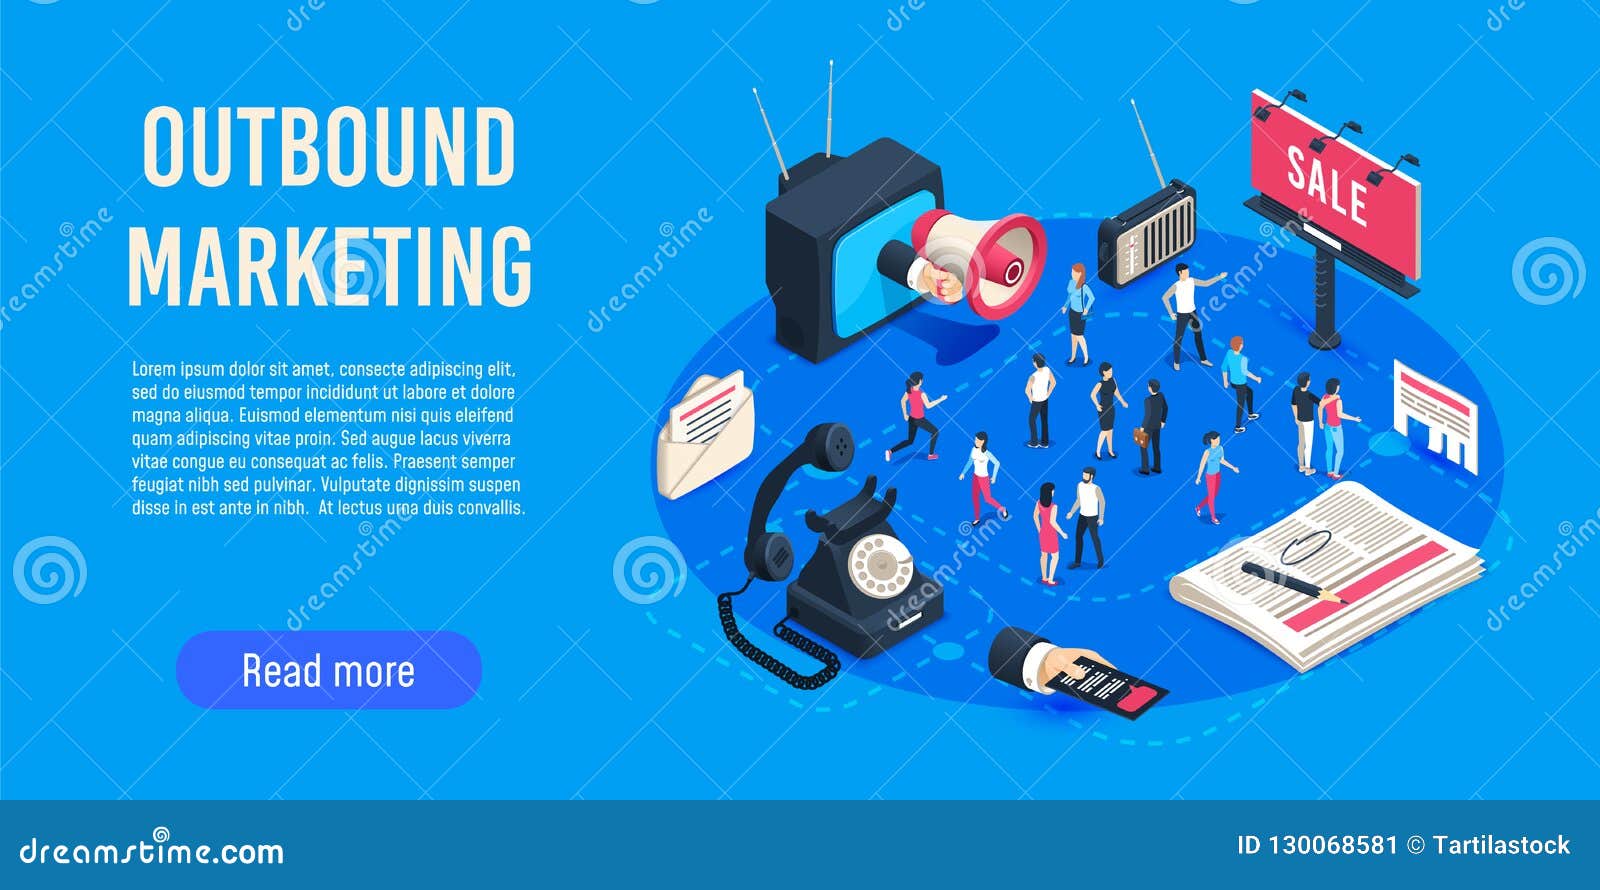 outbound marketing isometric. business market sales optimisation, corporate crm and social media ads communication